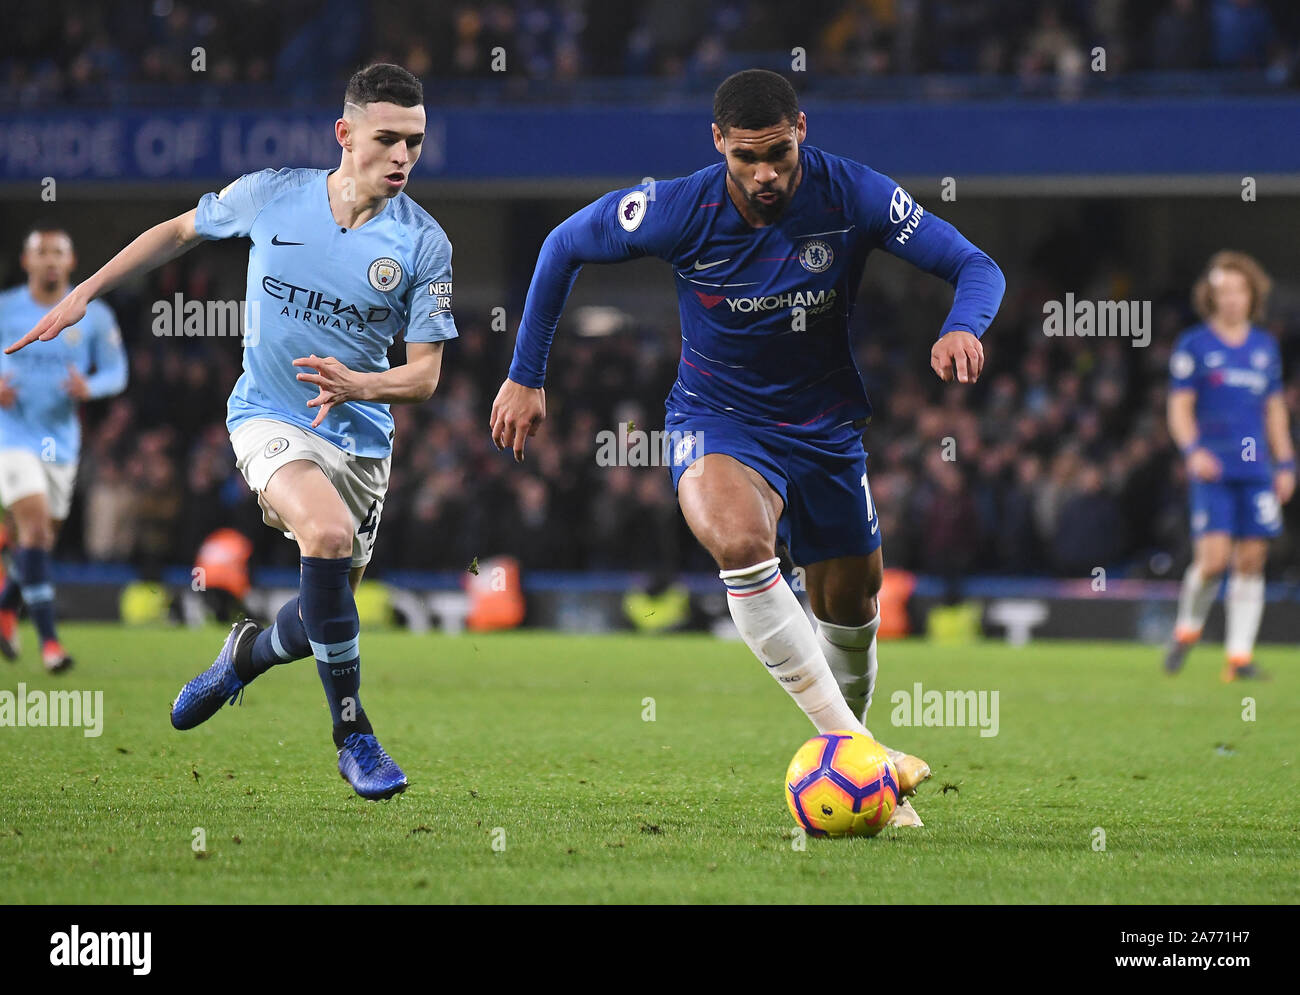 LONDON, ENGLAND - DECEMBER 8, 2018: Phil Foden of City (L) and Ruben Loftus-Cheek of Chelsea (R) pictured during the 2018/19 Premier League game between Chelsea FC and Manchester City at Stamford Bridge. Stock Photo